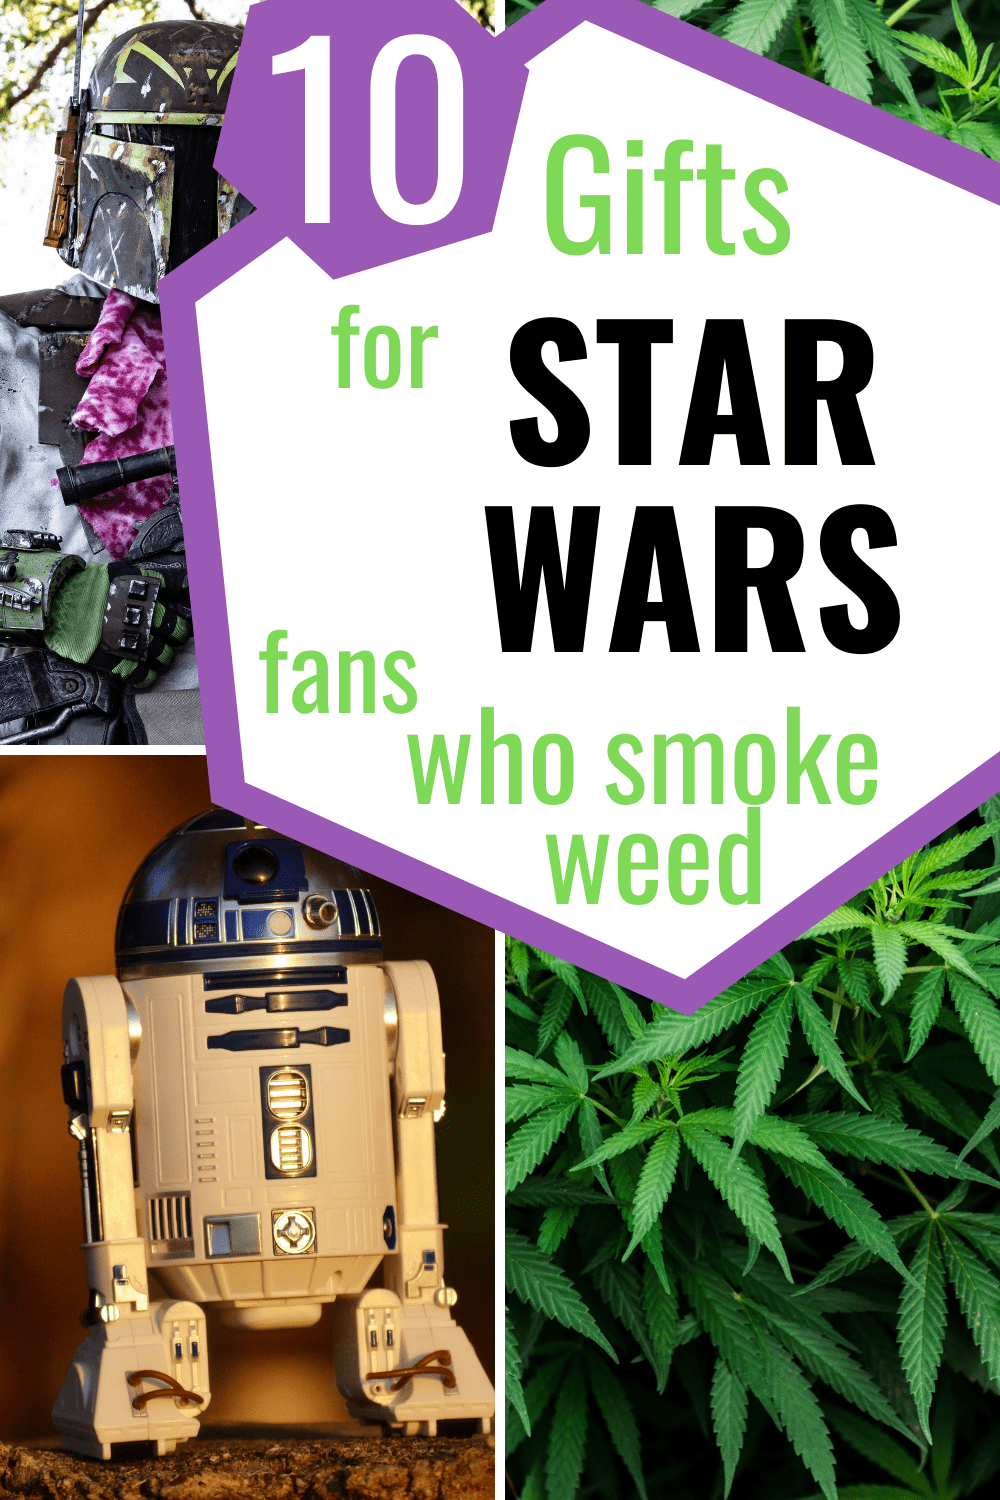 star wars r2-d2 boba fett and weed smokers